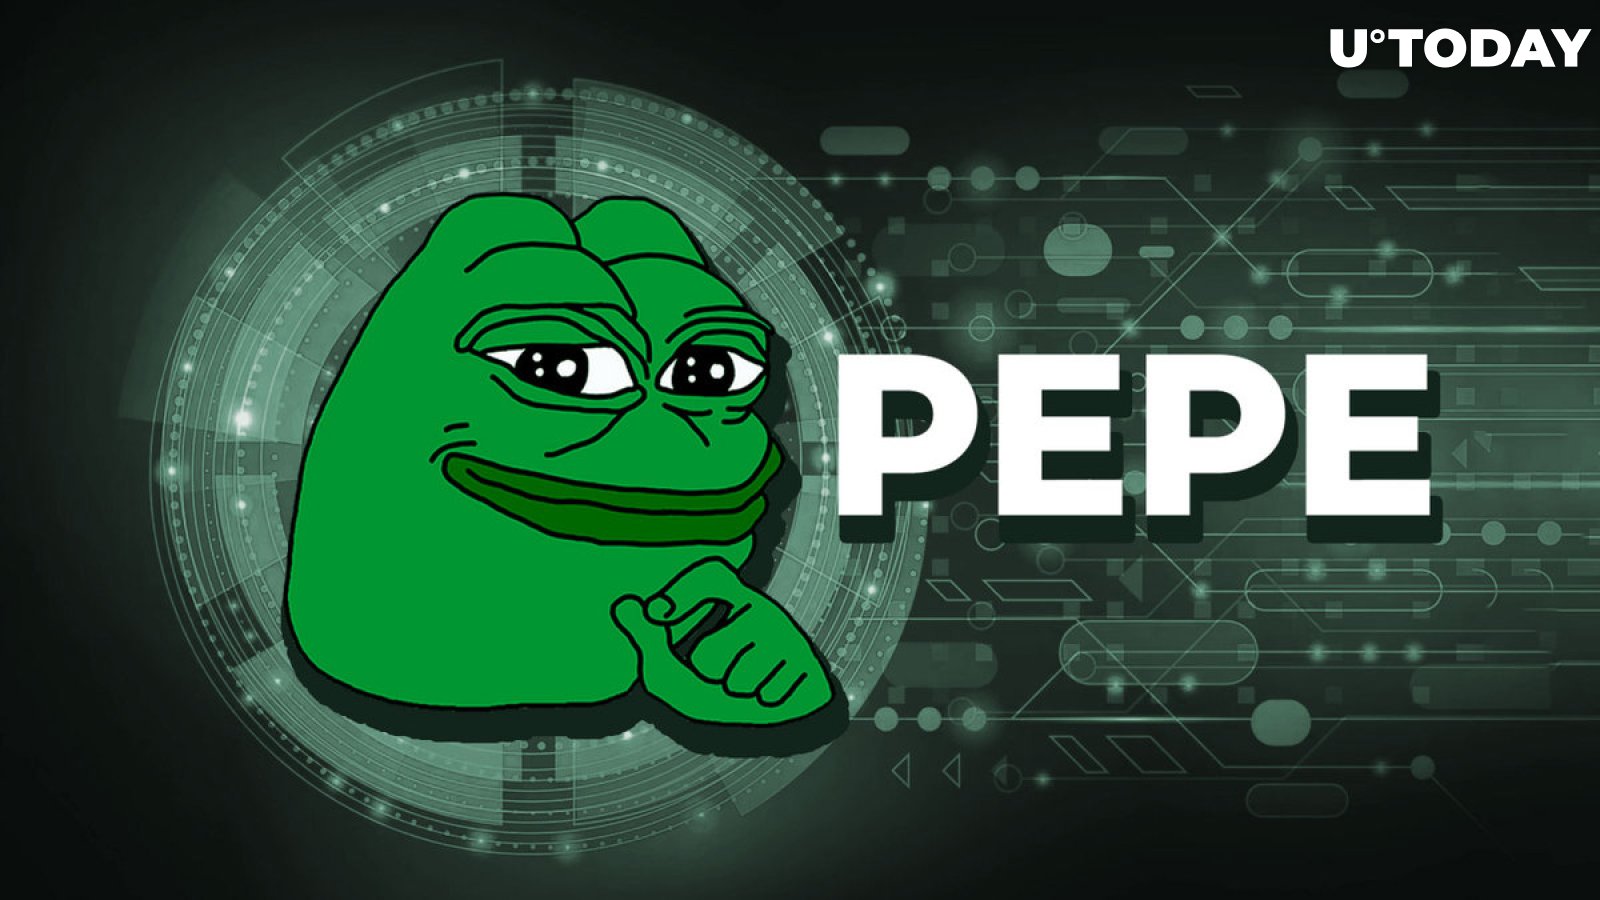 5 Pepe (PEPE) Addresses Made 3,200x, But All of Them Are Tied to Creator